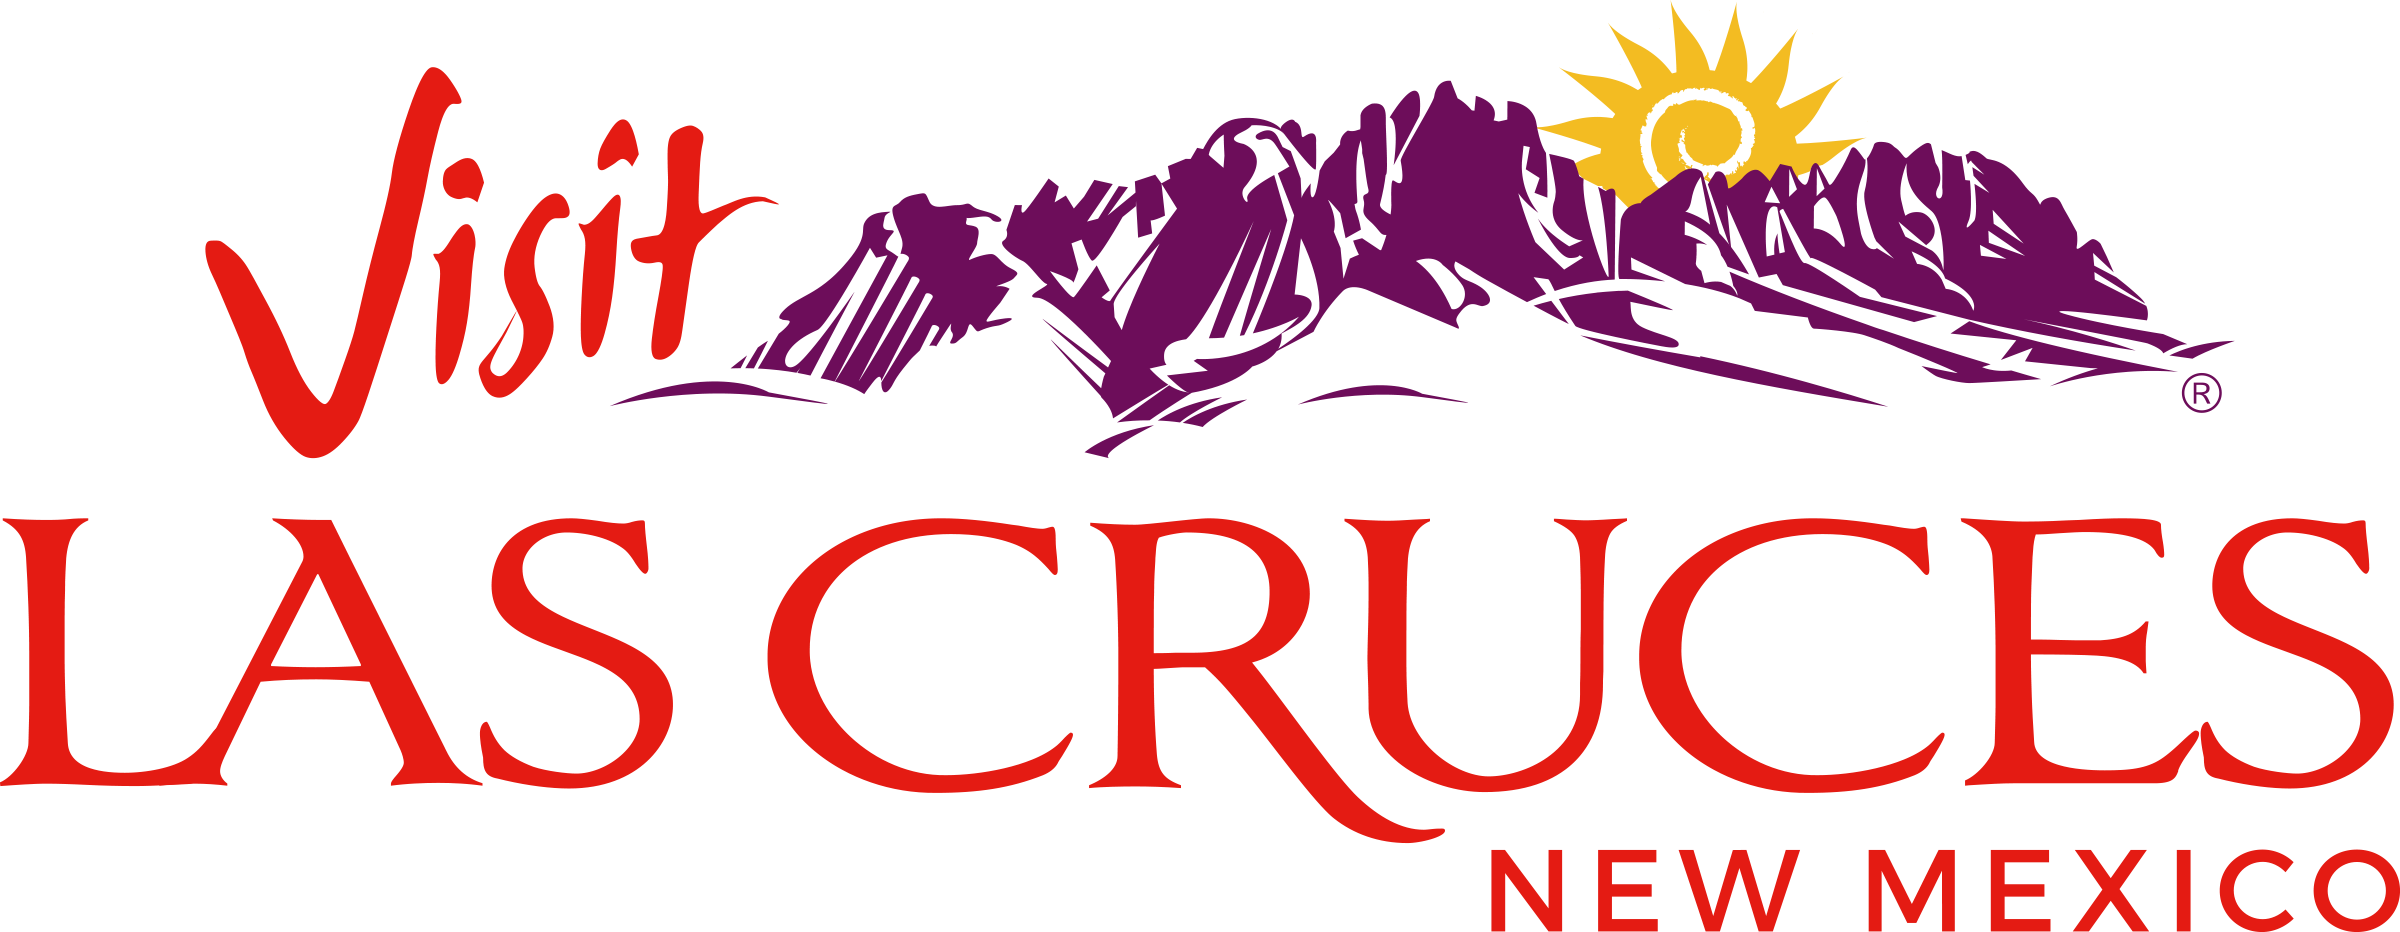 Las Cruces to Break Ground on Convention Center Expansion 5 Million